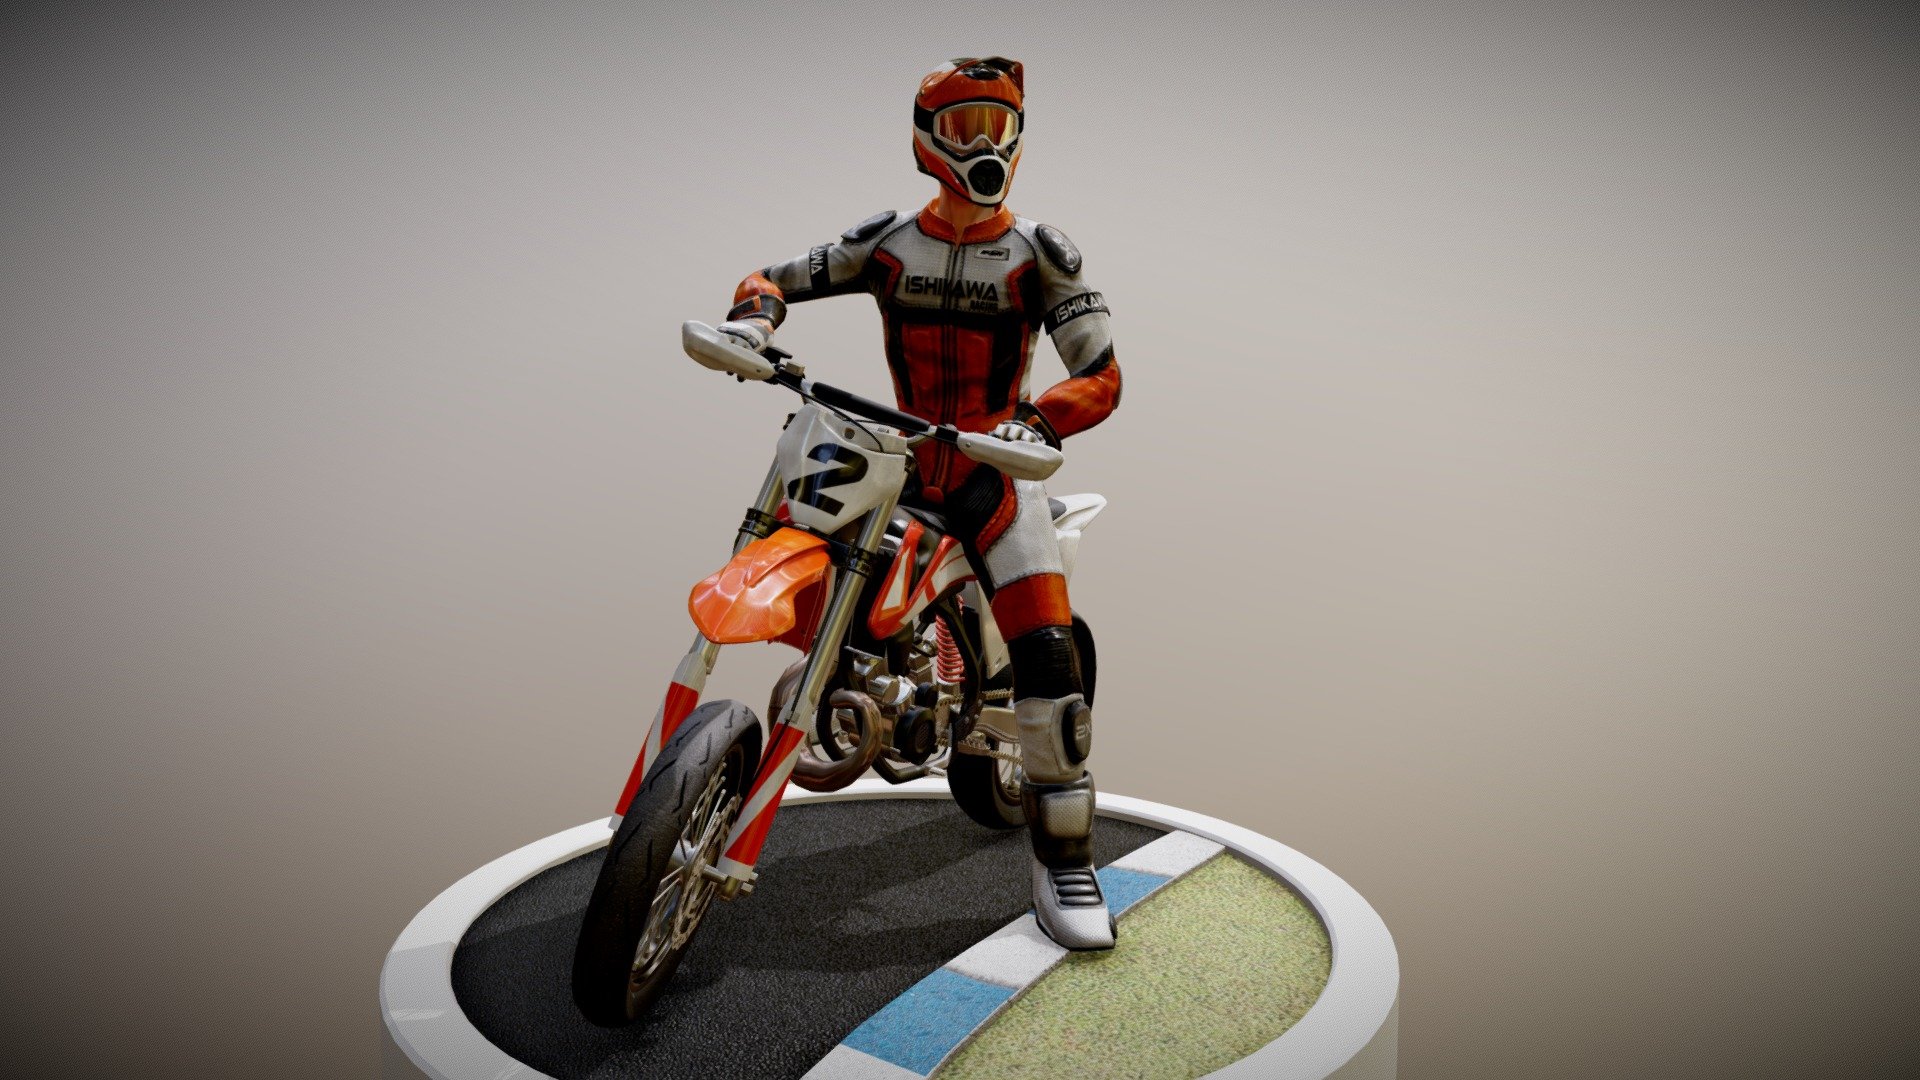 This is a re-imagining of a previous piece I made while I was in college. I feel like I've learned a lot since graduating, and wanted to give it another shot. I particularly wanted to improve my texturing abilities, by seeing how much detail I could add to the rider's outfit 3d model